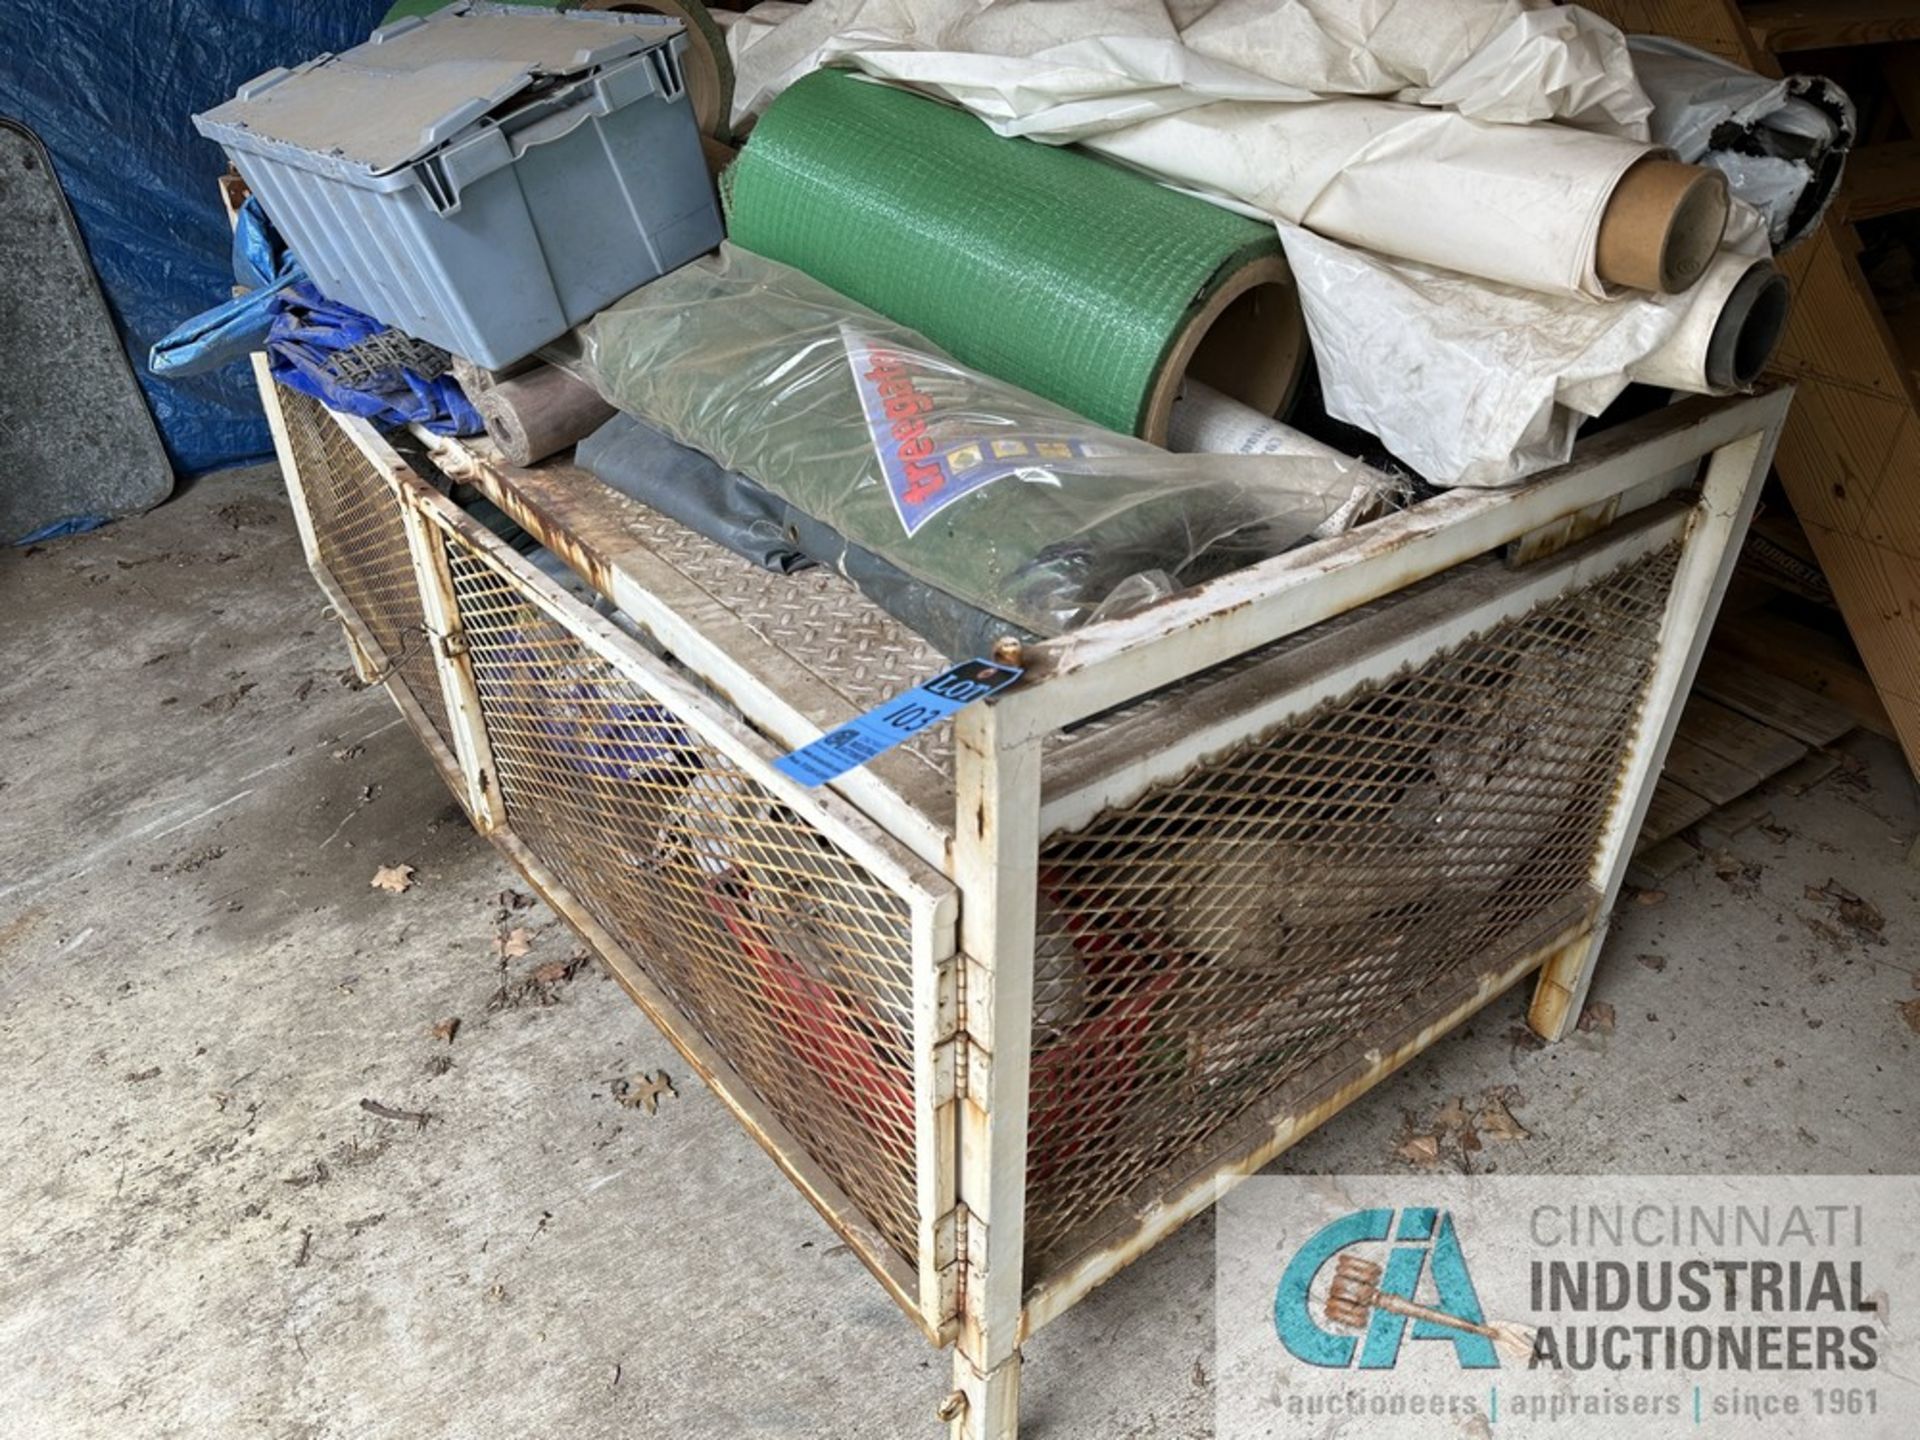 STEEL WIRE GRATED STORAGE BOX WITH MISCELLANEOUS TARPS *LOCATED IN SHED AT REAR OF BUILDING* - Image 6 of 6